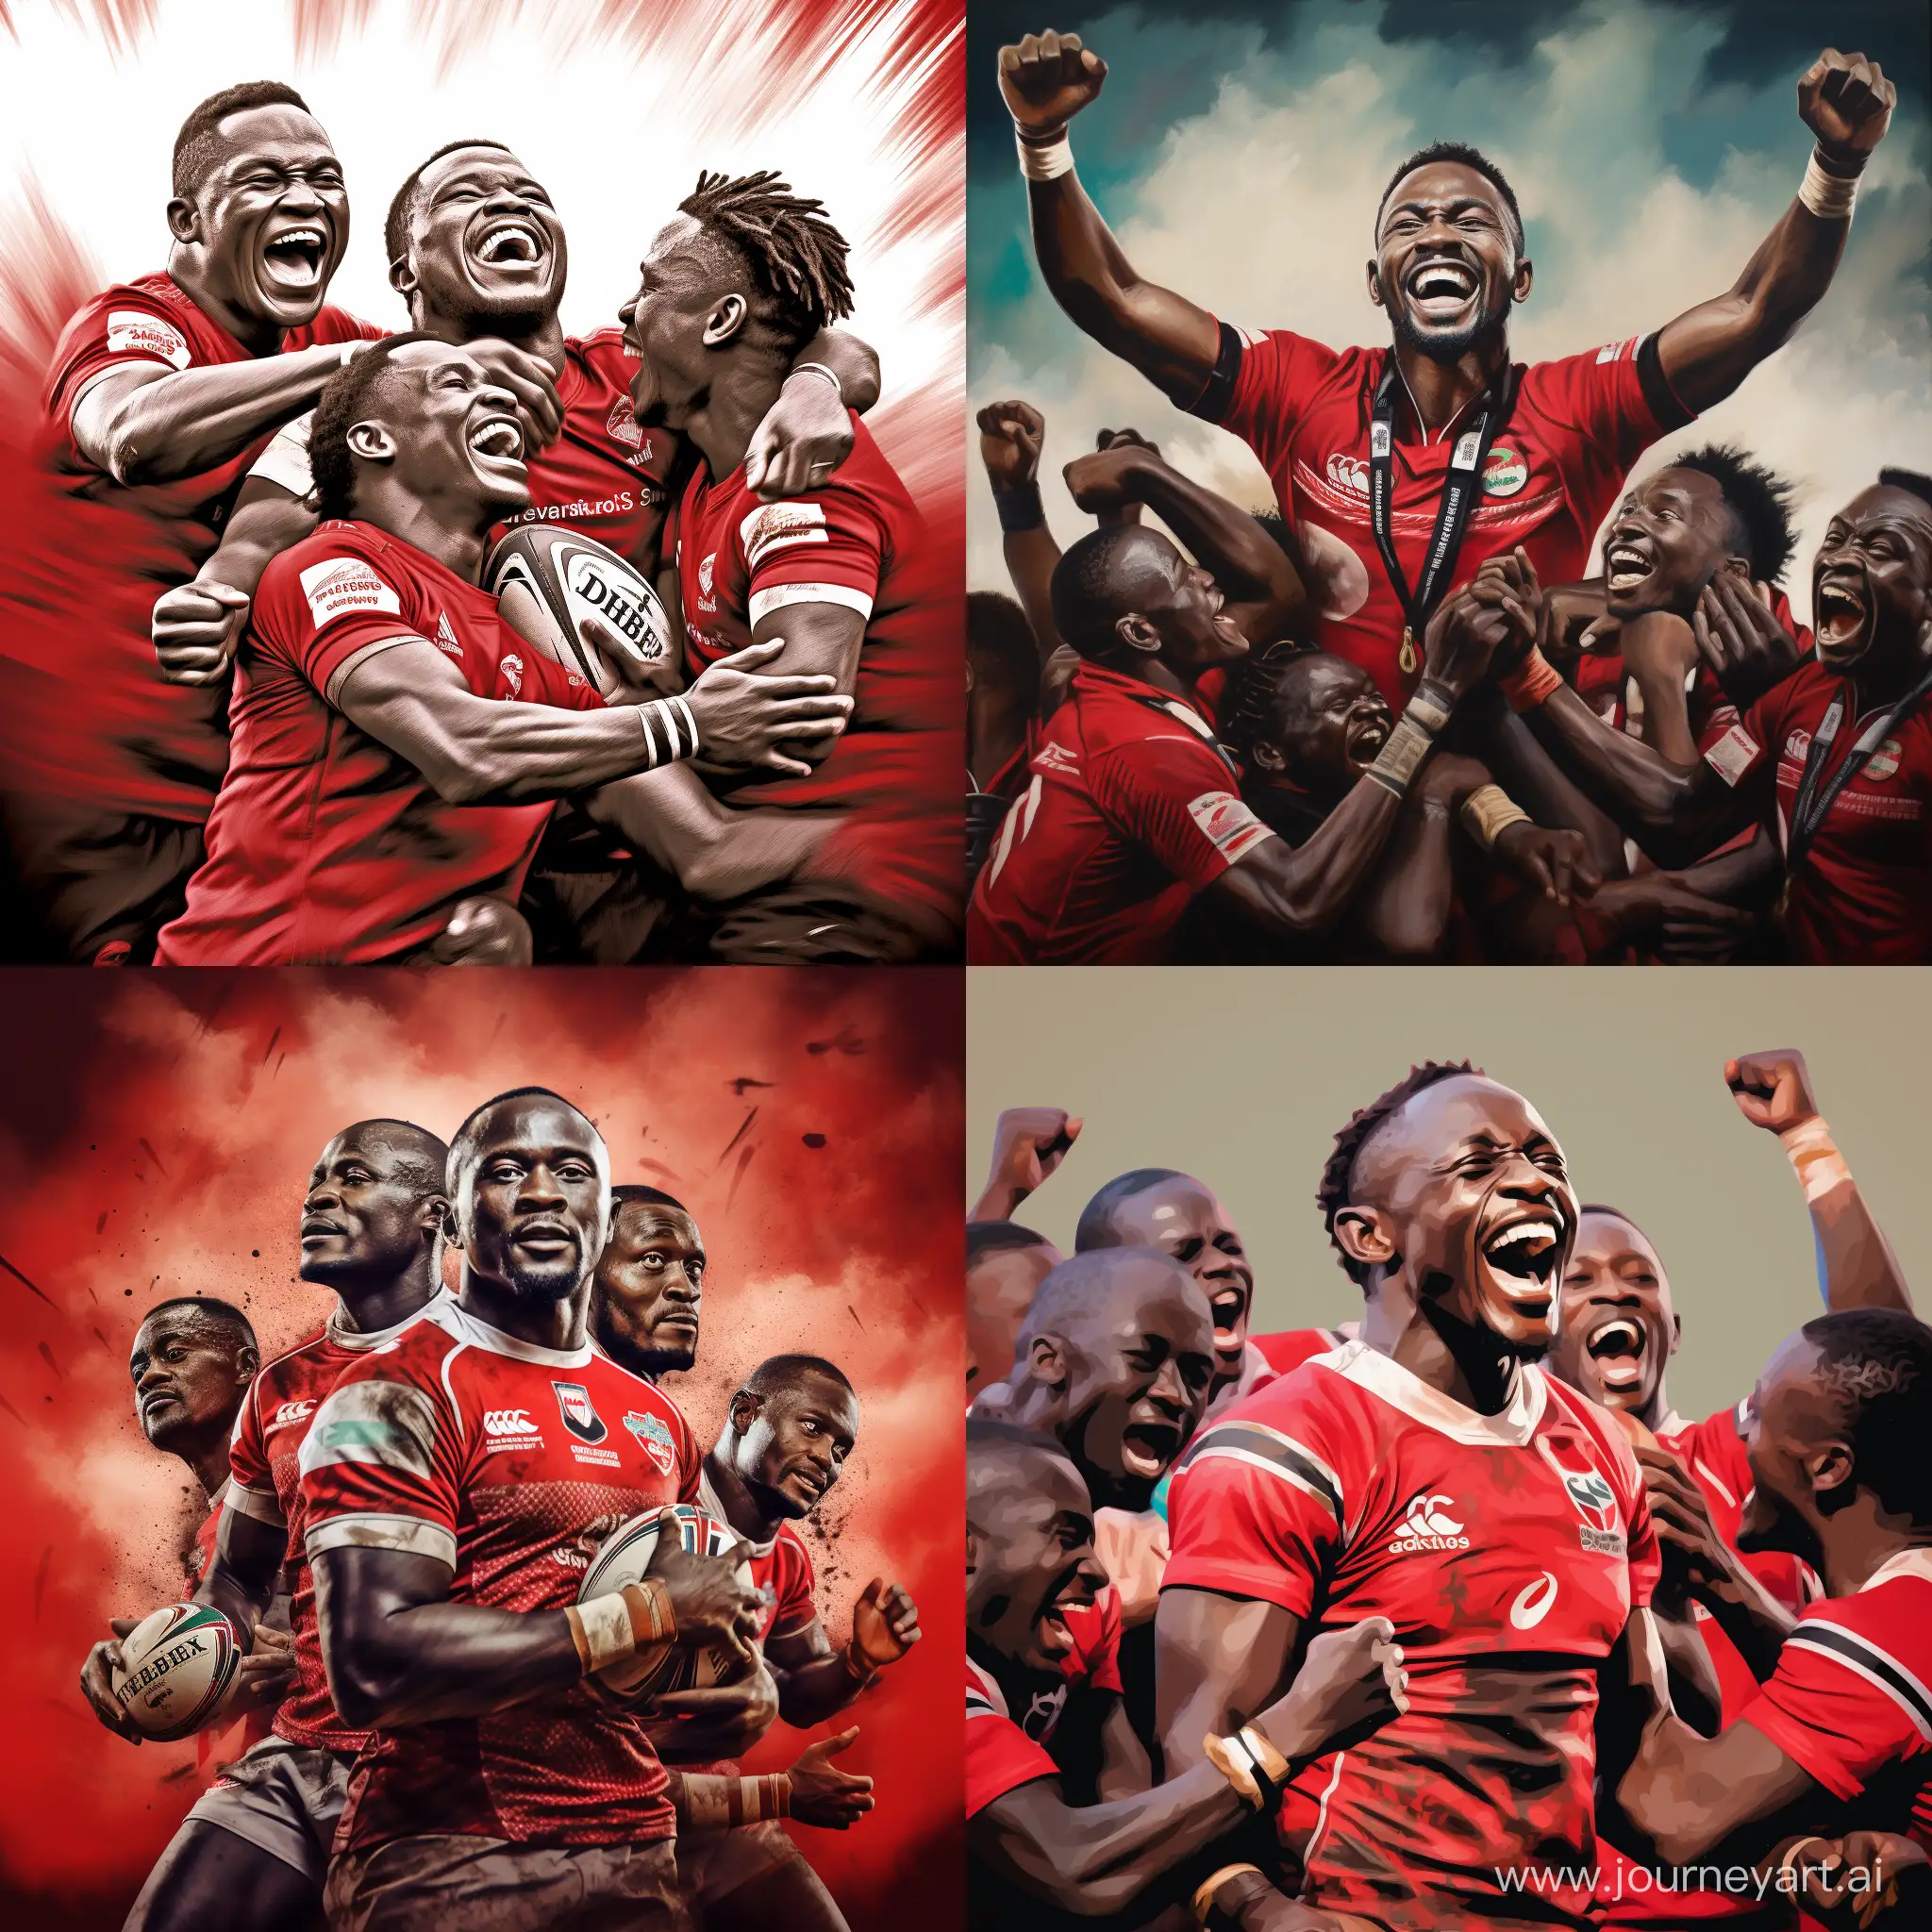 Kenya-Rugby-7-Champions-Celebrate-Victory-with-a-11-Score-Image-AR-7763